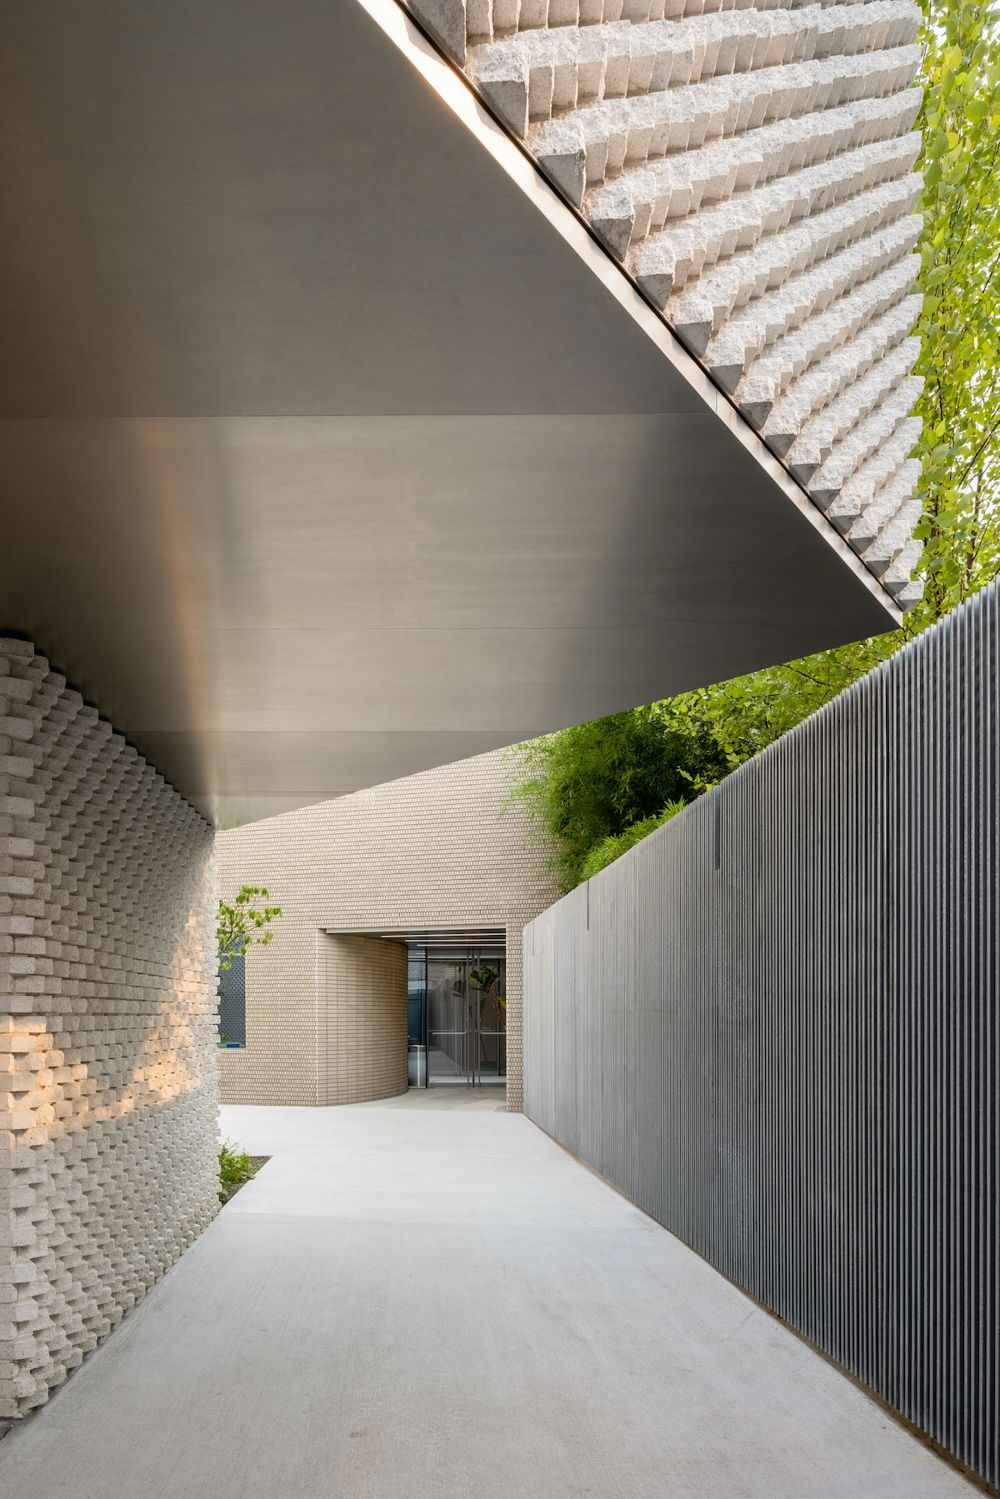 Photo of a view down an outdoor passageway of light, textured concrete, leading to a doorway. A triangular awning hangs overhead.